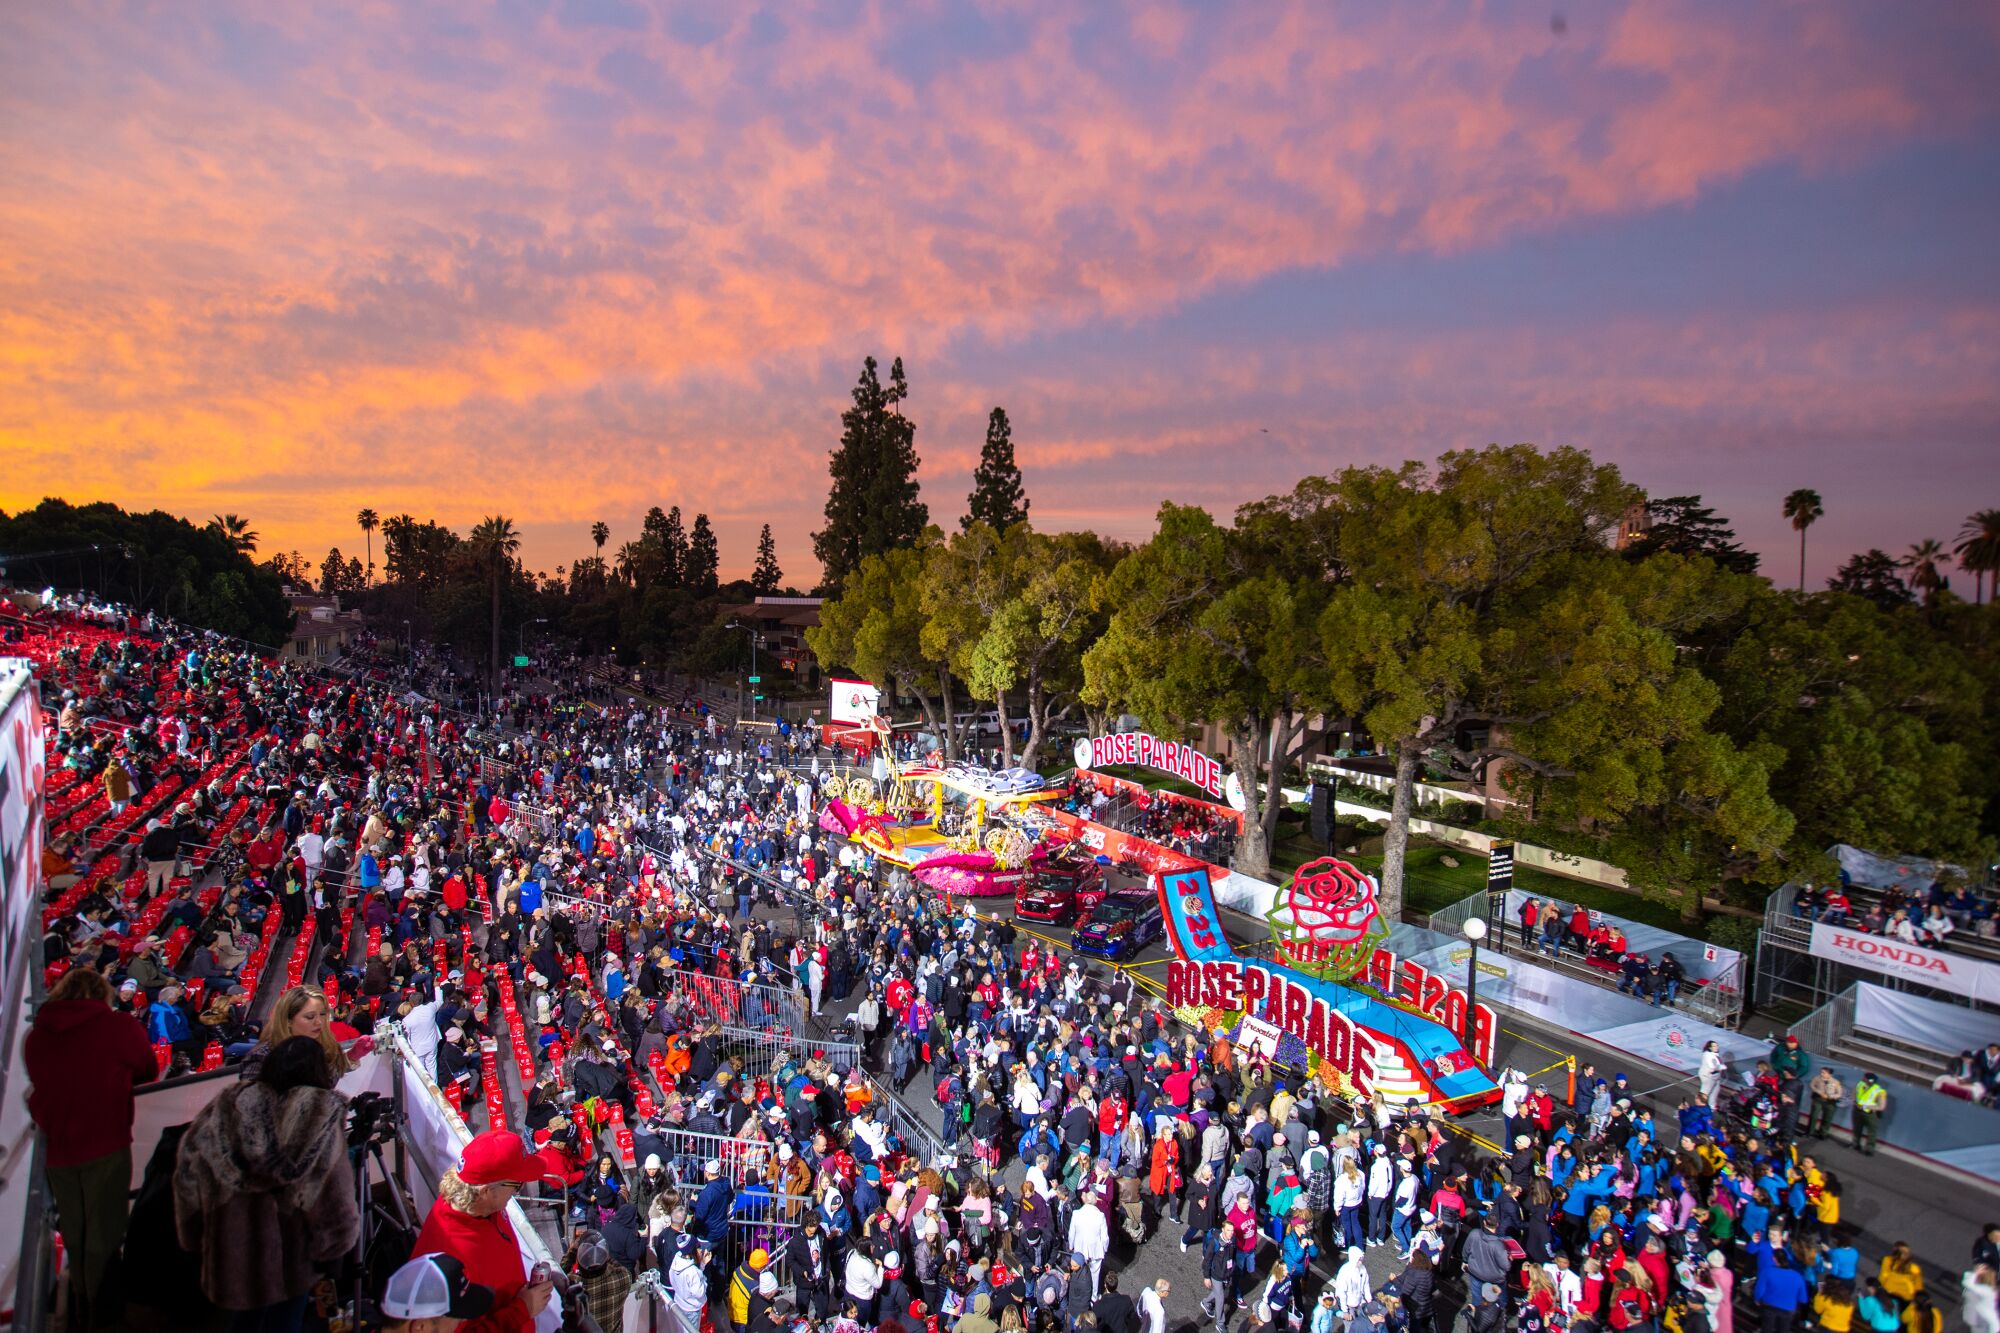 Clouds are red from sunrise as the Rose Parade begins